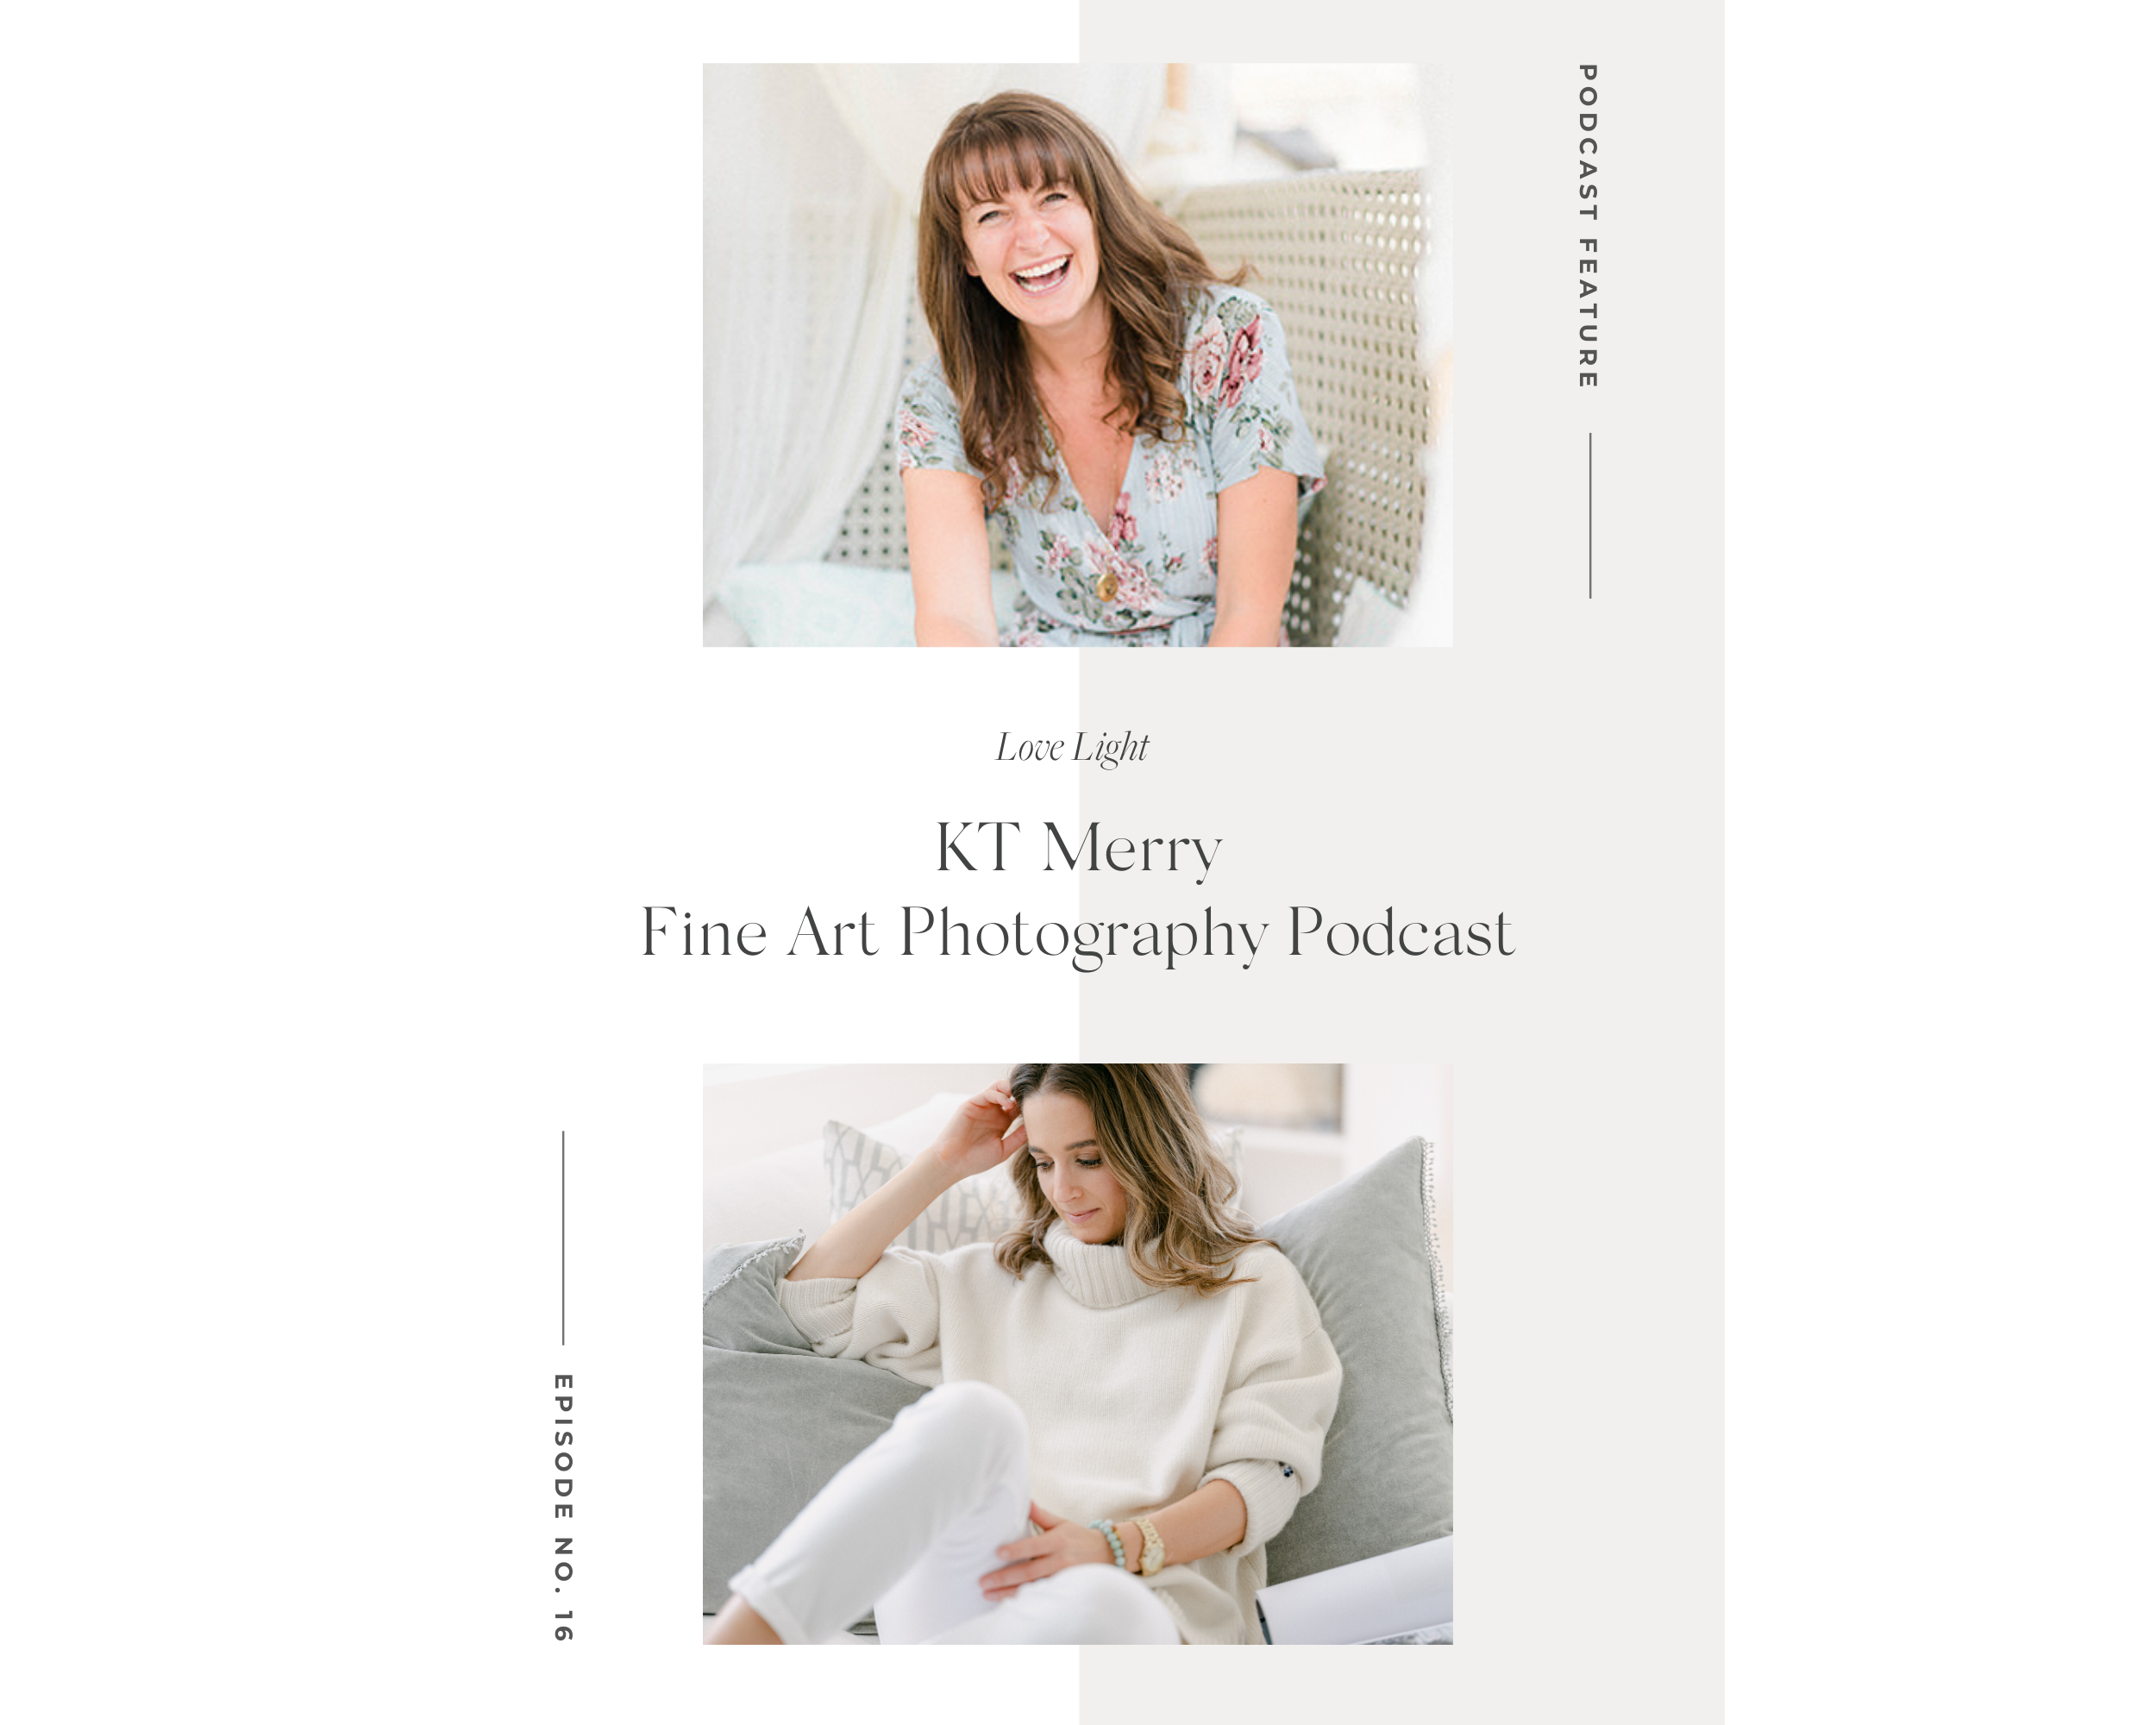 KT Merry talks with Sarah Jane Ethan on The Love Light Fine Art Photography podcast about how to run a photography business that pays; how to say no to the wrong type of clients and yes to the right ones; and the important of building giving into your business.